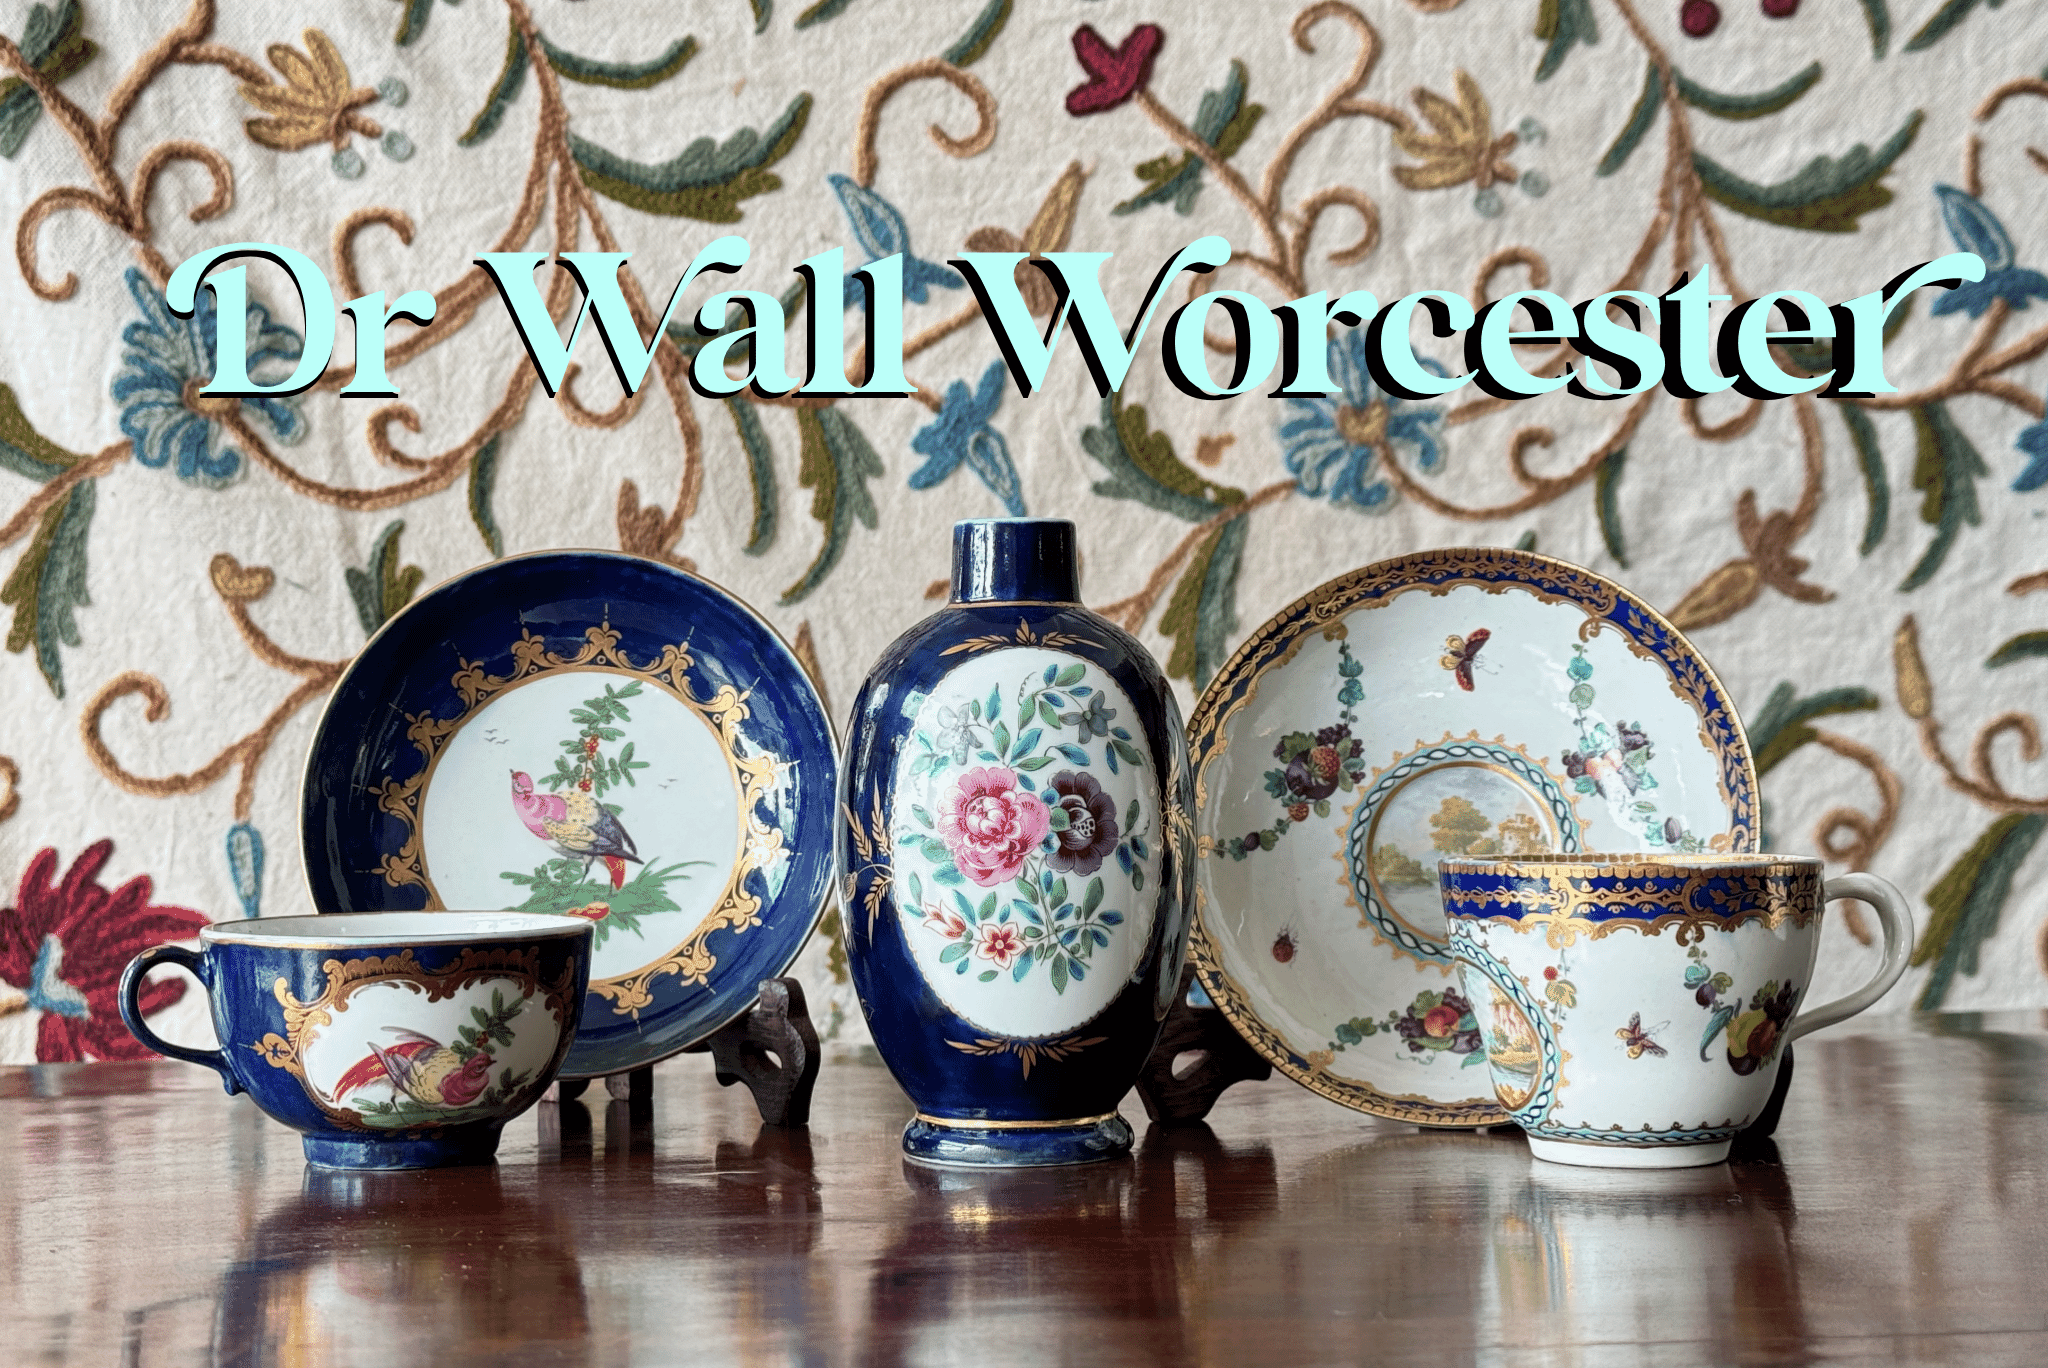 Dr Wall Worcester at Moorabool Antiques, Geelong